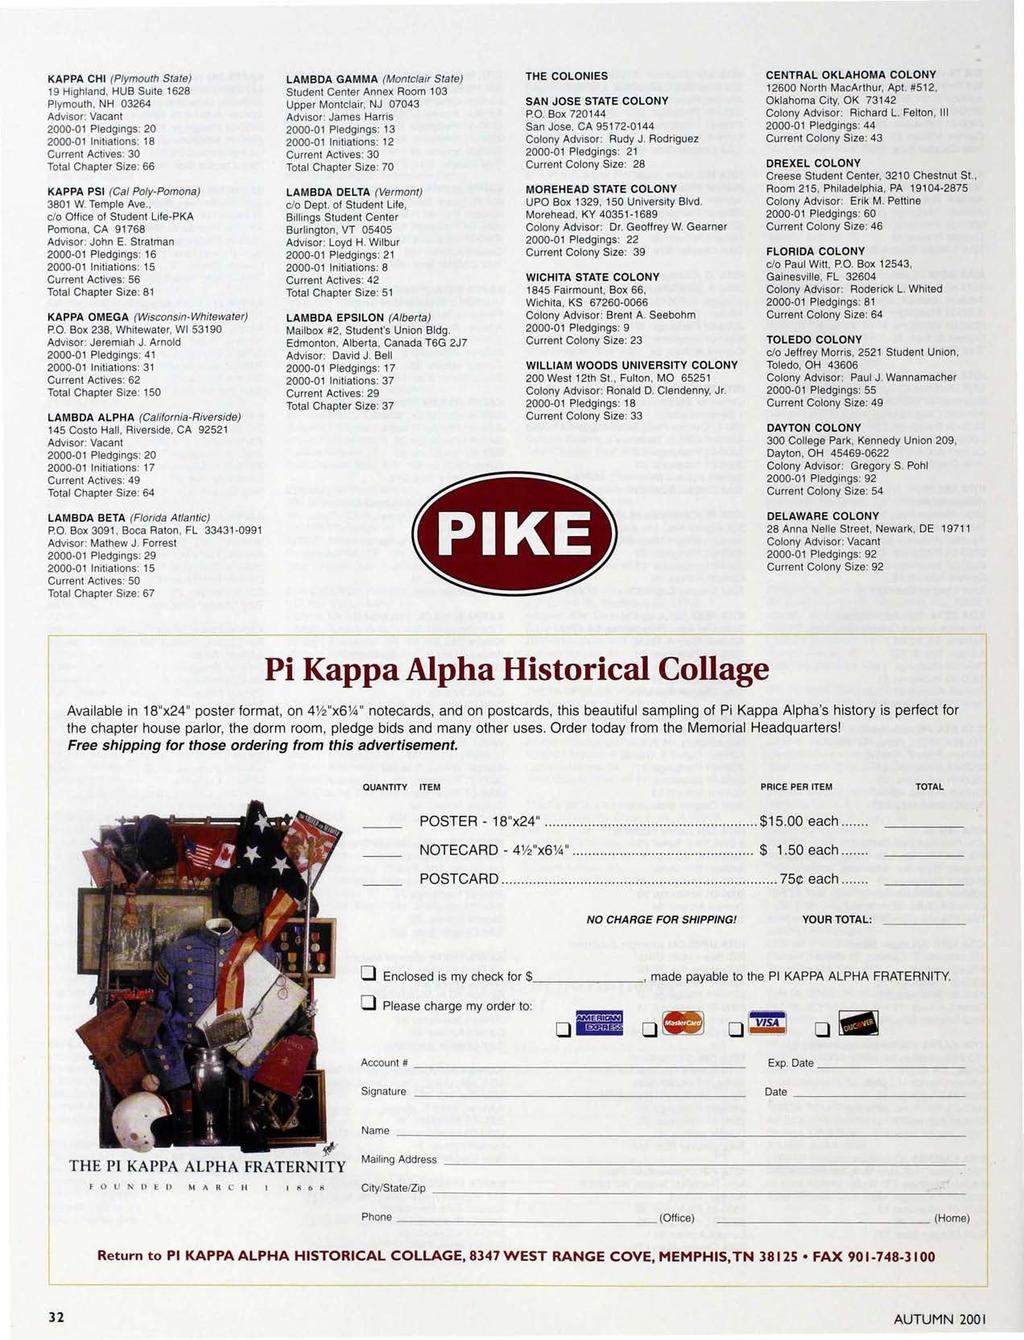 KAPPA CHI (Plymouth State) 19 Highland, HUB Suite 1628 Plymouth, NH 03264 Advisor: Vacant 2000-01 Pledgings: 20 2000-01 Initiations: 18 Current Actives: 30 Total Chapter Size: 66 KAPPA PSI (Cal